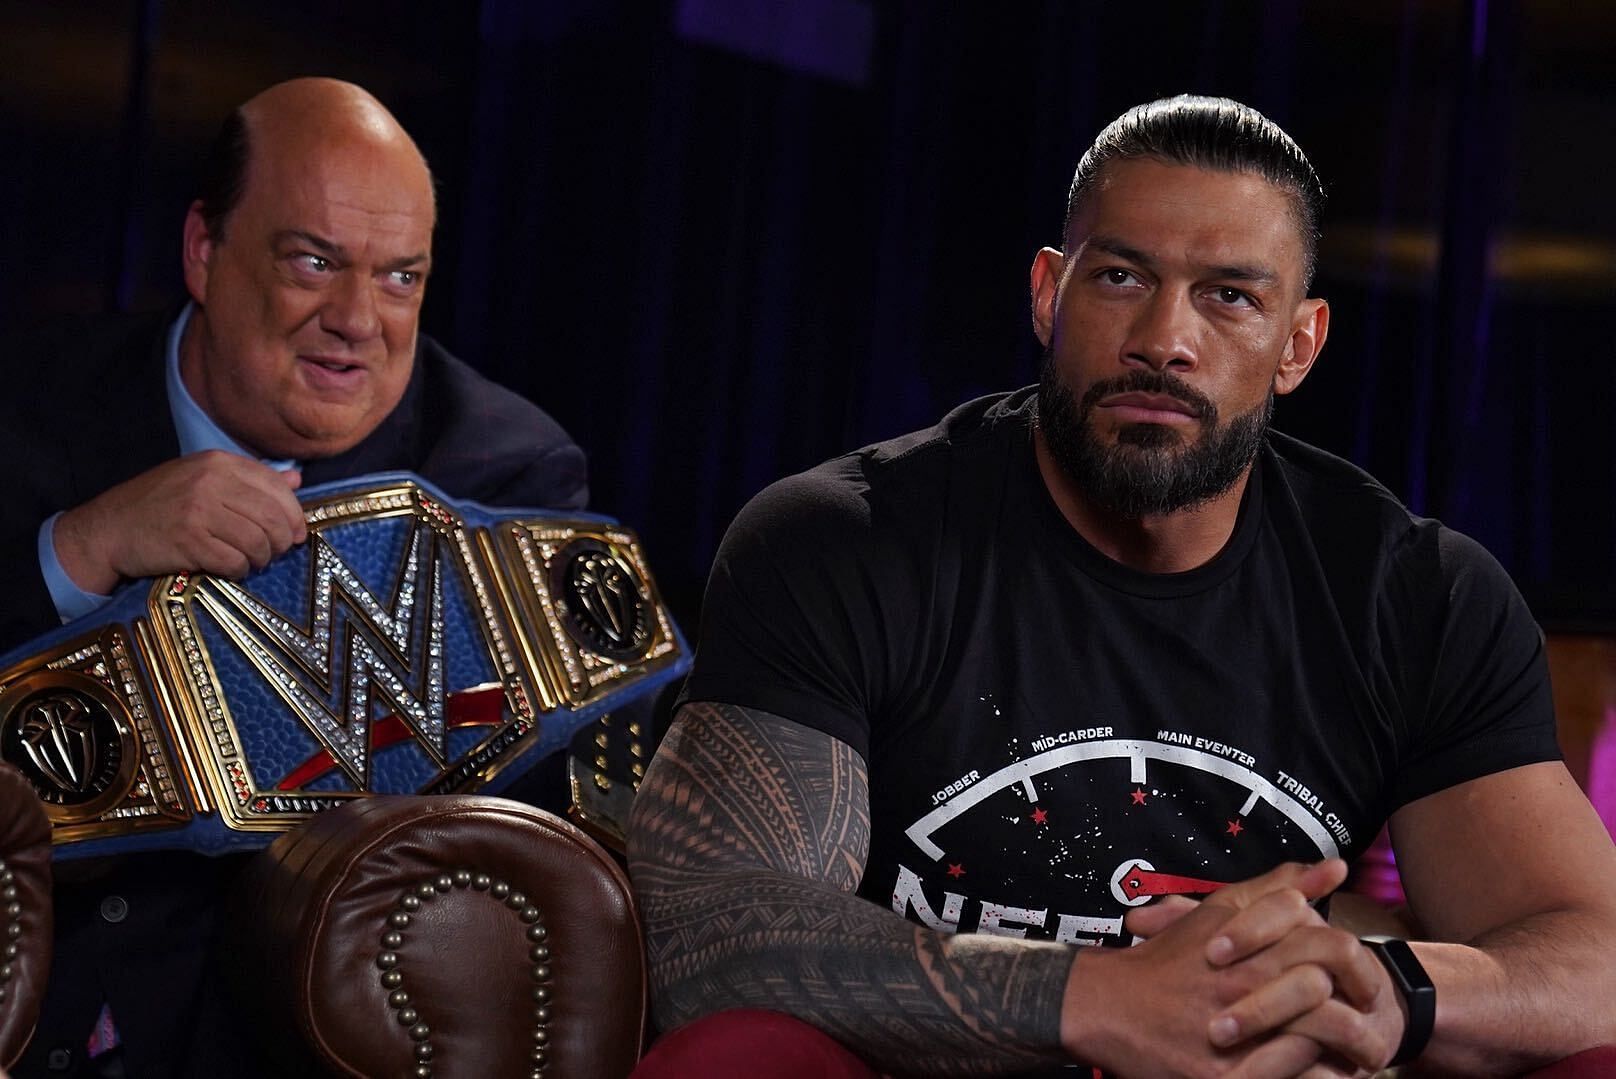 Roman Reigns with his Special Council Paul Heyman.